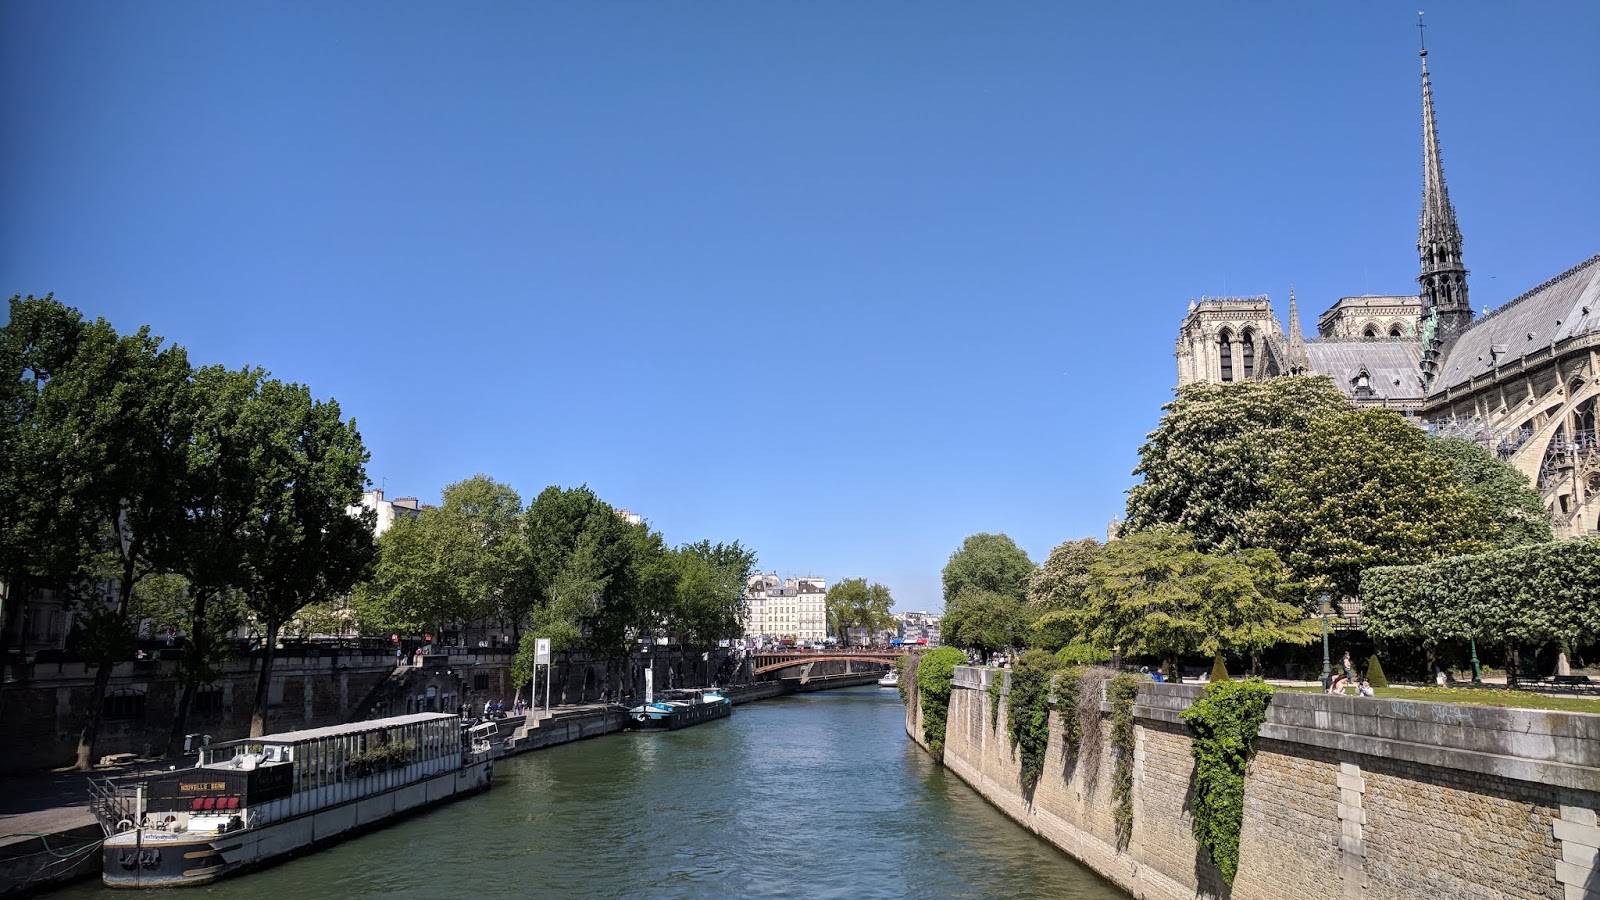 The Beautiful View of the River Seine from behind the Notre-Dame Cathedral